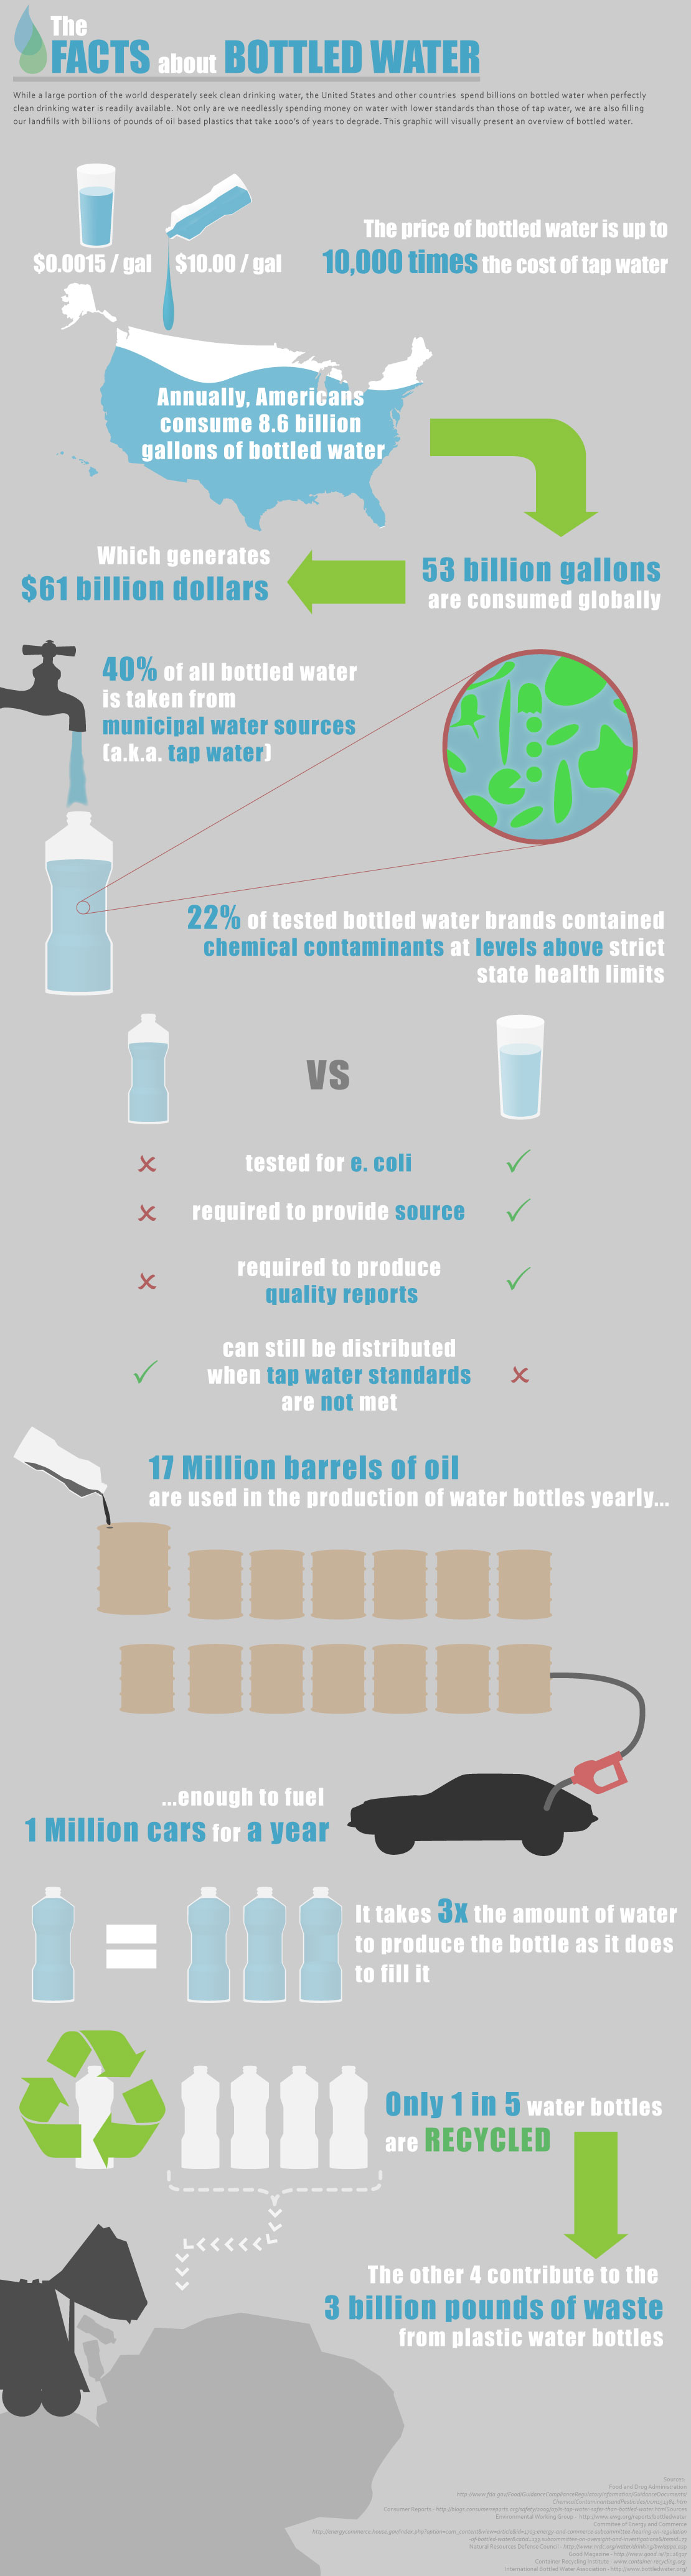 The Facts About Bottled Water